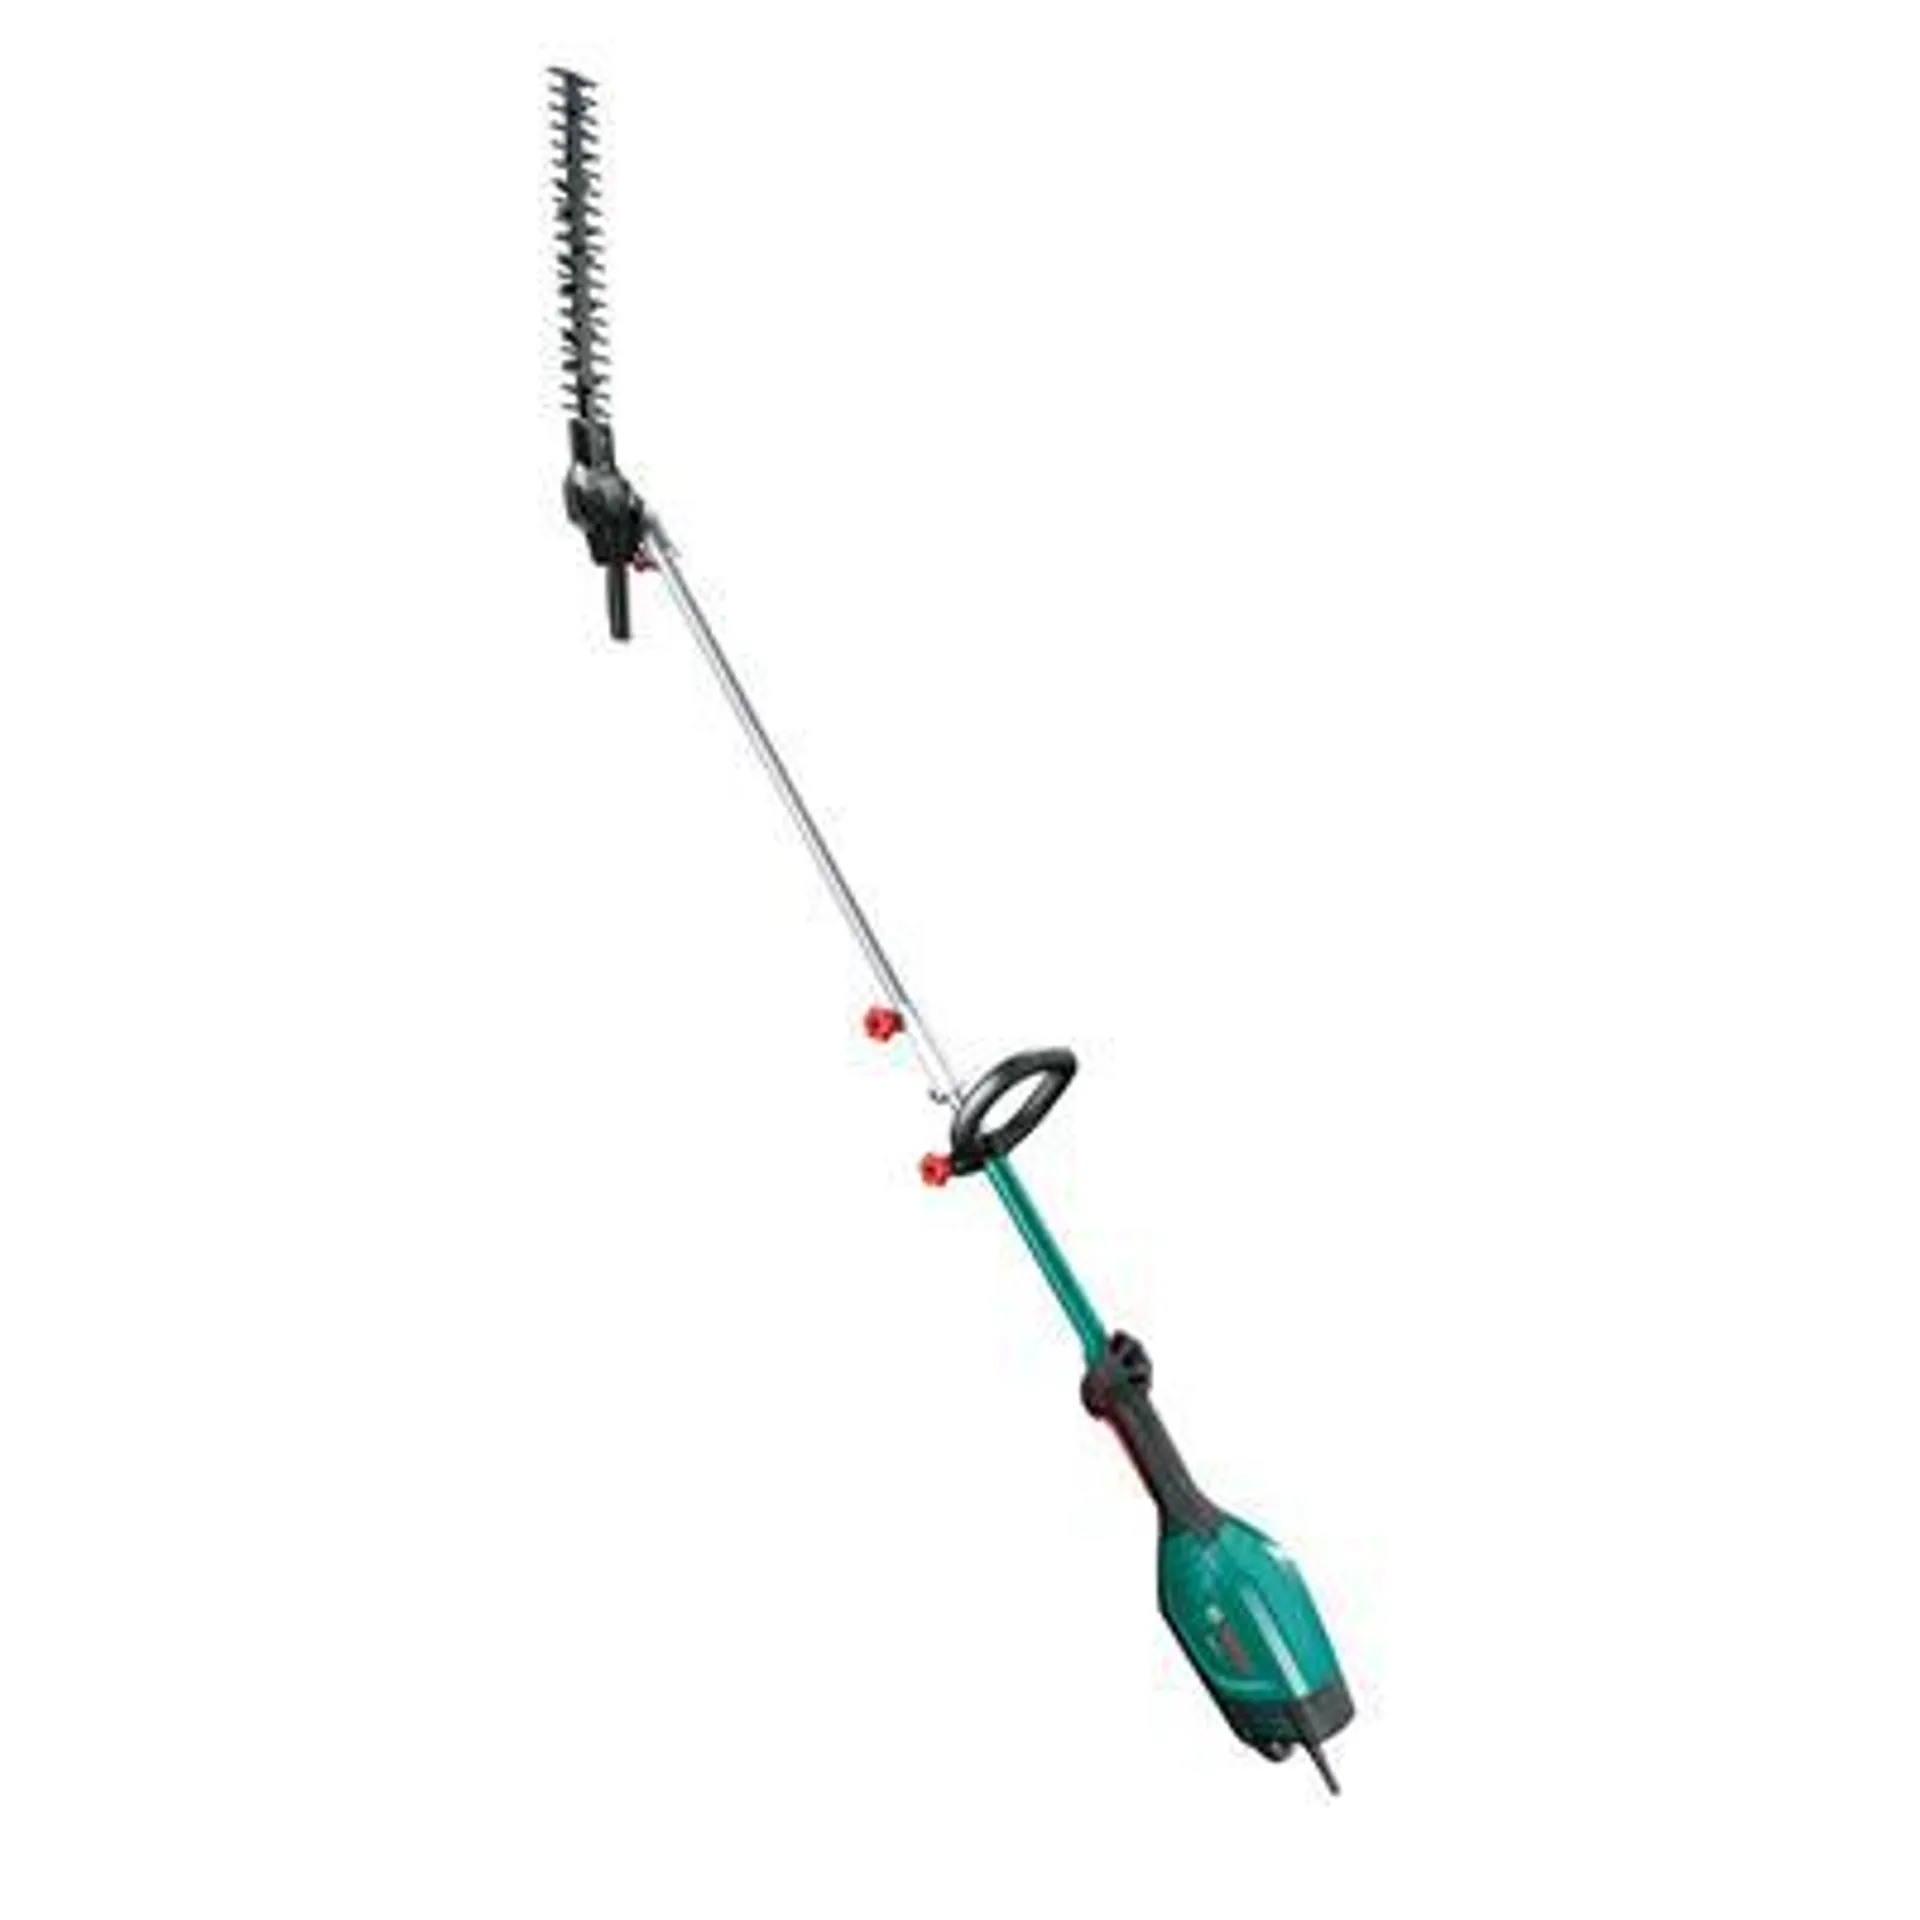 Bosch AMW Trimmer 10 with POLE 06008A3370